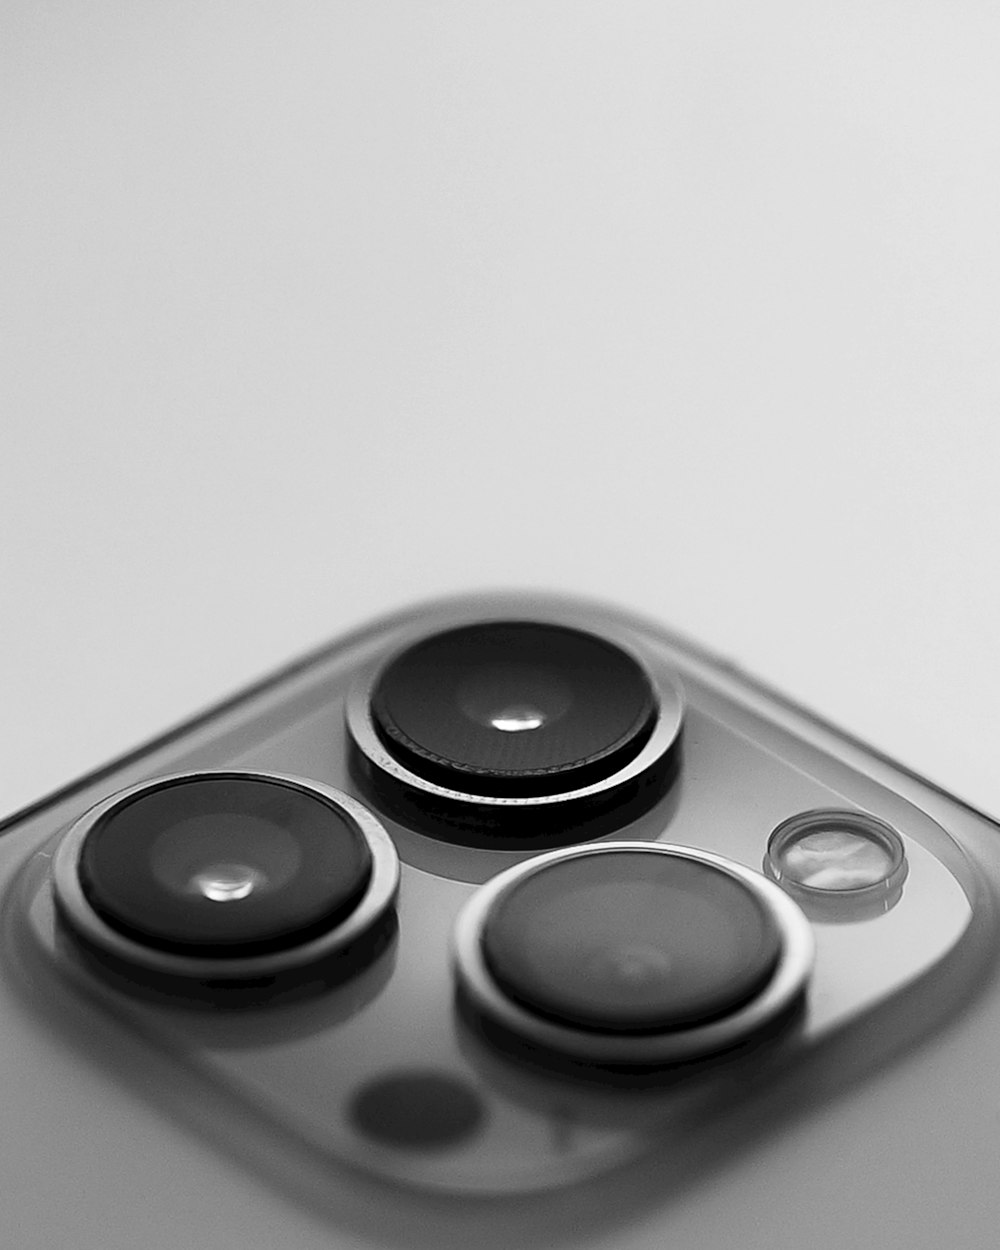 a close up of a cell phone with buttons